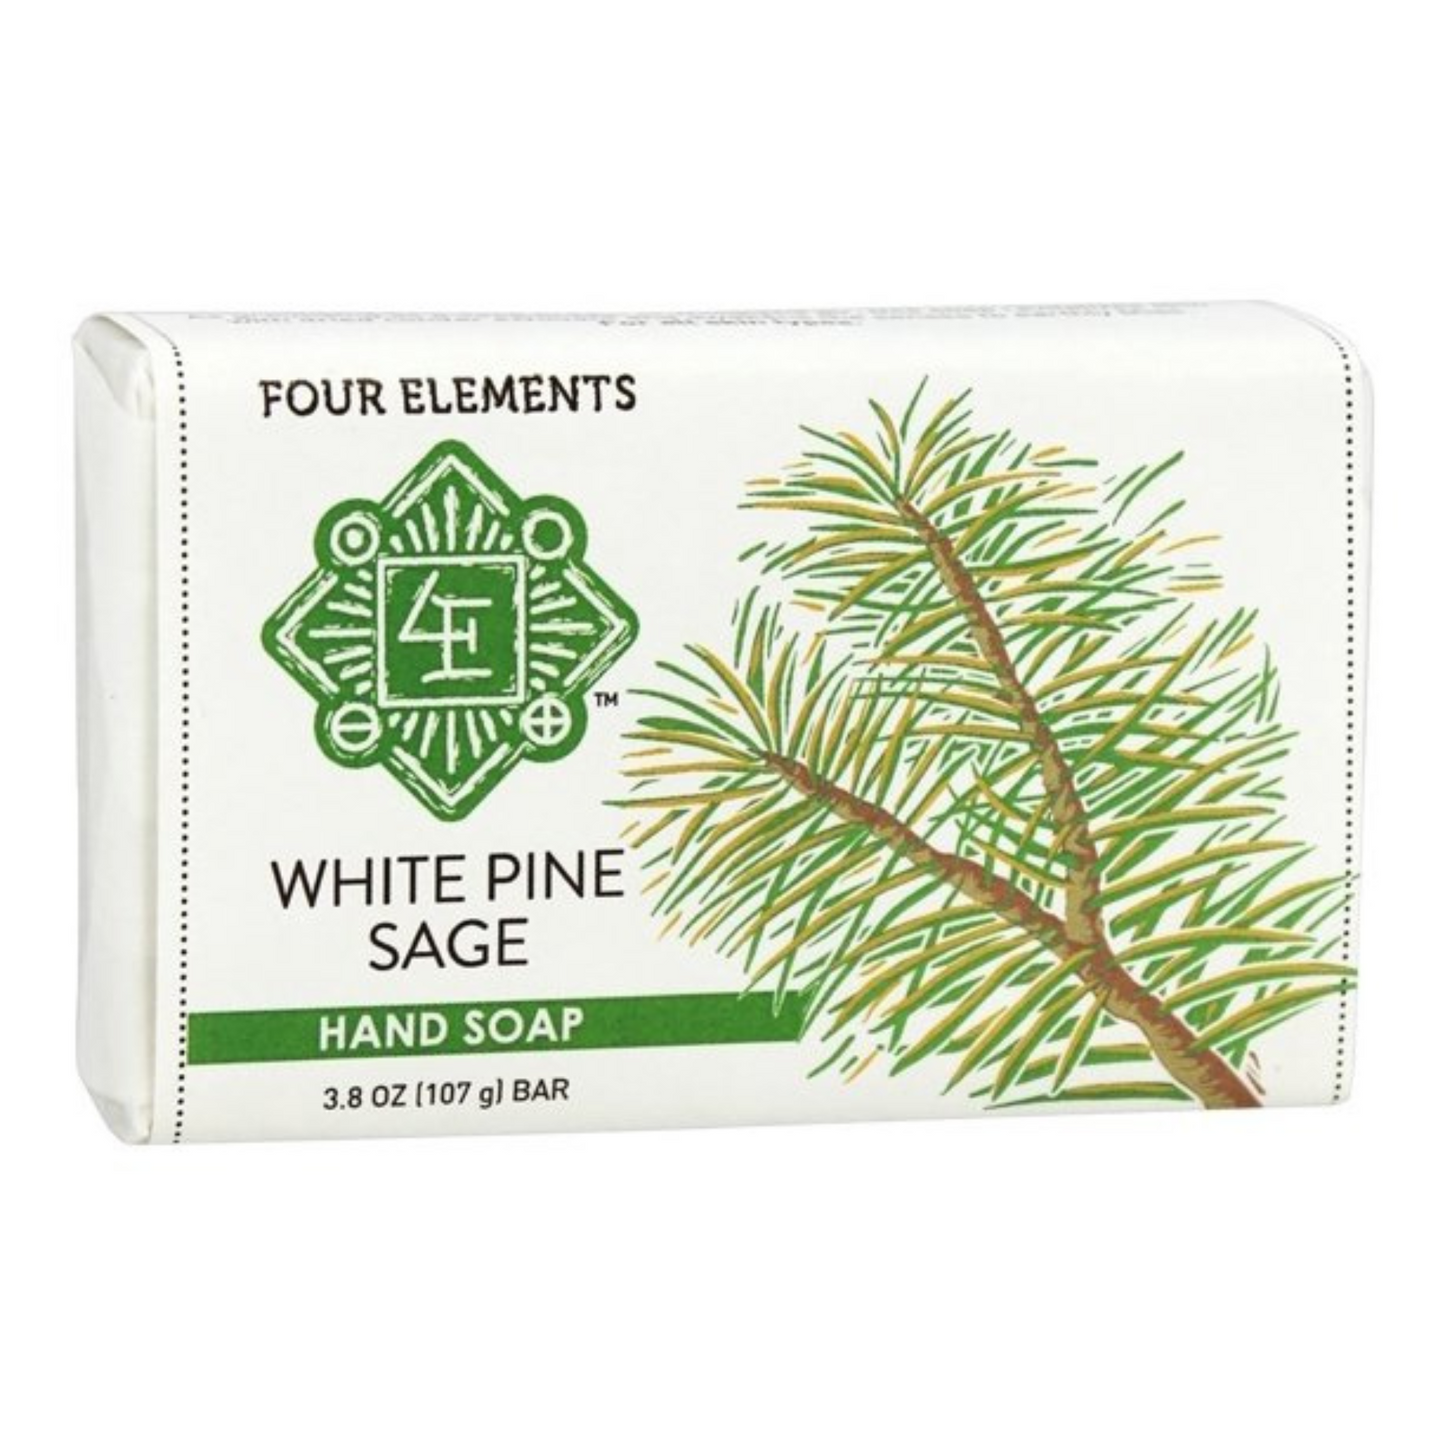 Primary Image of White Pine Sage Herbal Soap